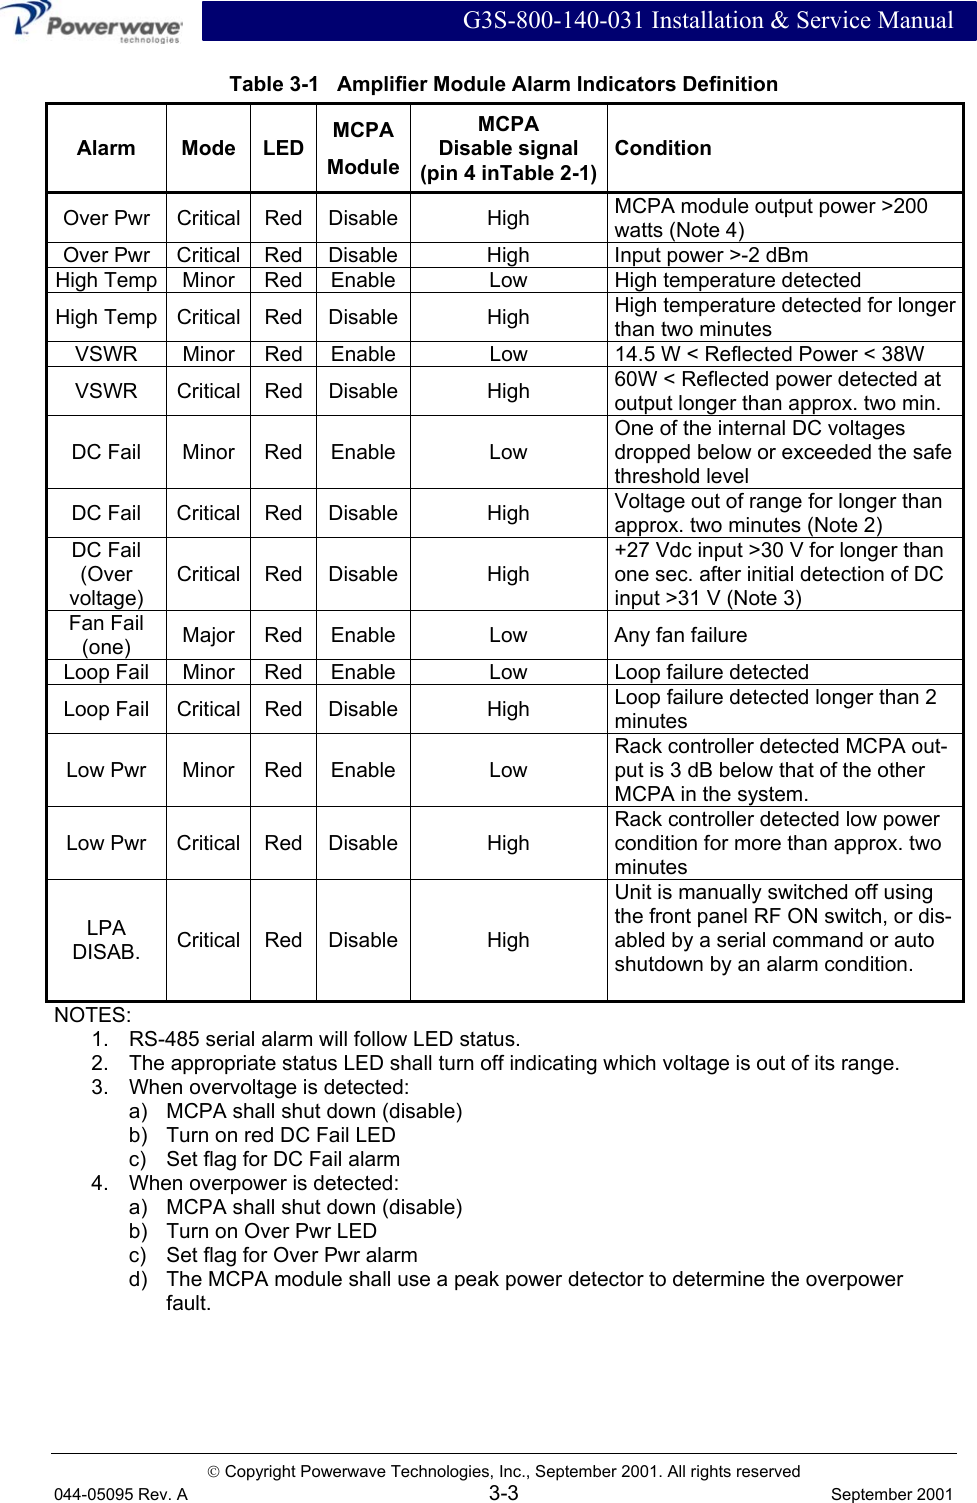  G3S-800-140-031 Installation &amp; Service Manual  Copyright Powerwave Technologies, Inc., September 2001. All rights reserved 044-05095 Rev. A 3-3  September 2001 Table 3-1   Amplifier Module Alarm Indicators Definition Alarm Mode LED MCPA ModuleMCPA Disable signal (pin 4 inTable 2-1)Condition Over Pwr  Critical  Red  Disable High  MCPA module output power &gt;200 watts (Note 4) Over Pwr  Critical  Red  Disable High  Input power &gt;-2 dBm High Temp  Minor  Red  Enable  Low  High temperature detected High Temp  Critical  Red  Disable High  High temperature detected for longer than two minutes VSWR  Minor  Red  Enable  Low  14.5 W &lt; Reflected Power &lt; 38W VSWR Critical Red Disable High  60W &lt; Reflected power detected at output longer than approx. two min. DC Fail  Minor  Red  Enable  Low One of the internal DC voltages dropped below or exceeded the safe threshold level DC Fail  Critical  Red  Disable High  Voltage out of range for longer than approx. two minutes (Note 2) DC Fail (Over  voltage) Critical Red Disable High +27 Vdc input &gt;30 V for longer than one sec. after initial detection of DC input &gt;31 V (Note 3) Fan Fail (one)  Major  Red  Enable  Low  Any fan failure Loop Fail  Minor  Red  Enable  Low  Loop failure detected Loop Fail  Critical  Red  Disable High  Loop failure detected longer than 2 minutes Low Pwr  Minor  Red  Enable  Low Rack controller detected MCPA out-put is 3 dB below that of the other MCPA in the system. Low Pwr  Critical  Red  Disable High Rack controller detected low power condition for more than approx. two minutes LPA DISAB.  Critical Red Disable High Unit is manually switched off using the front panel RF ON switch, or dis-abled by a serial command or auto shutdown by an alarm condition. NOTES: 1.  RS-485 serial alarm will follow LED status. 2.  The appropriate status LED shall turn off indicating which voltage is out of its range. 3.  When overvoltage is detected: a)  MCPA shall shut down (disable) b)  Turn on red DC Fail LED c)  Set flag for DC Fail alarm 4.  When overpower is detected: a)  MCPA shall shut down (disable) b)  Turn on Over Pwr LED c)  Set flag for Over Pwr alarm d)  The MCPA module shall use a peak power detector to determine the overpower fault.  